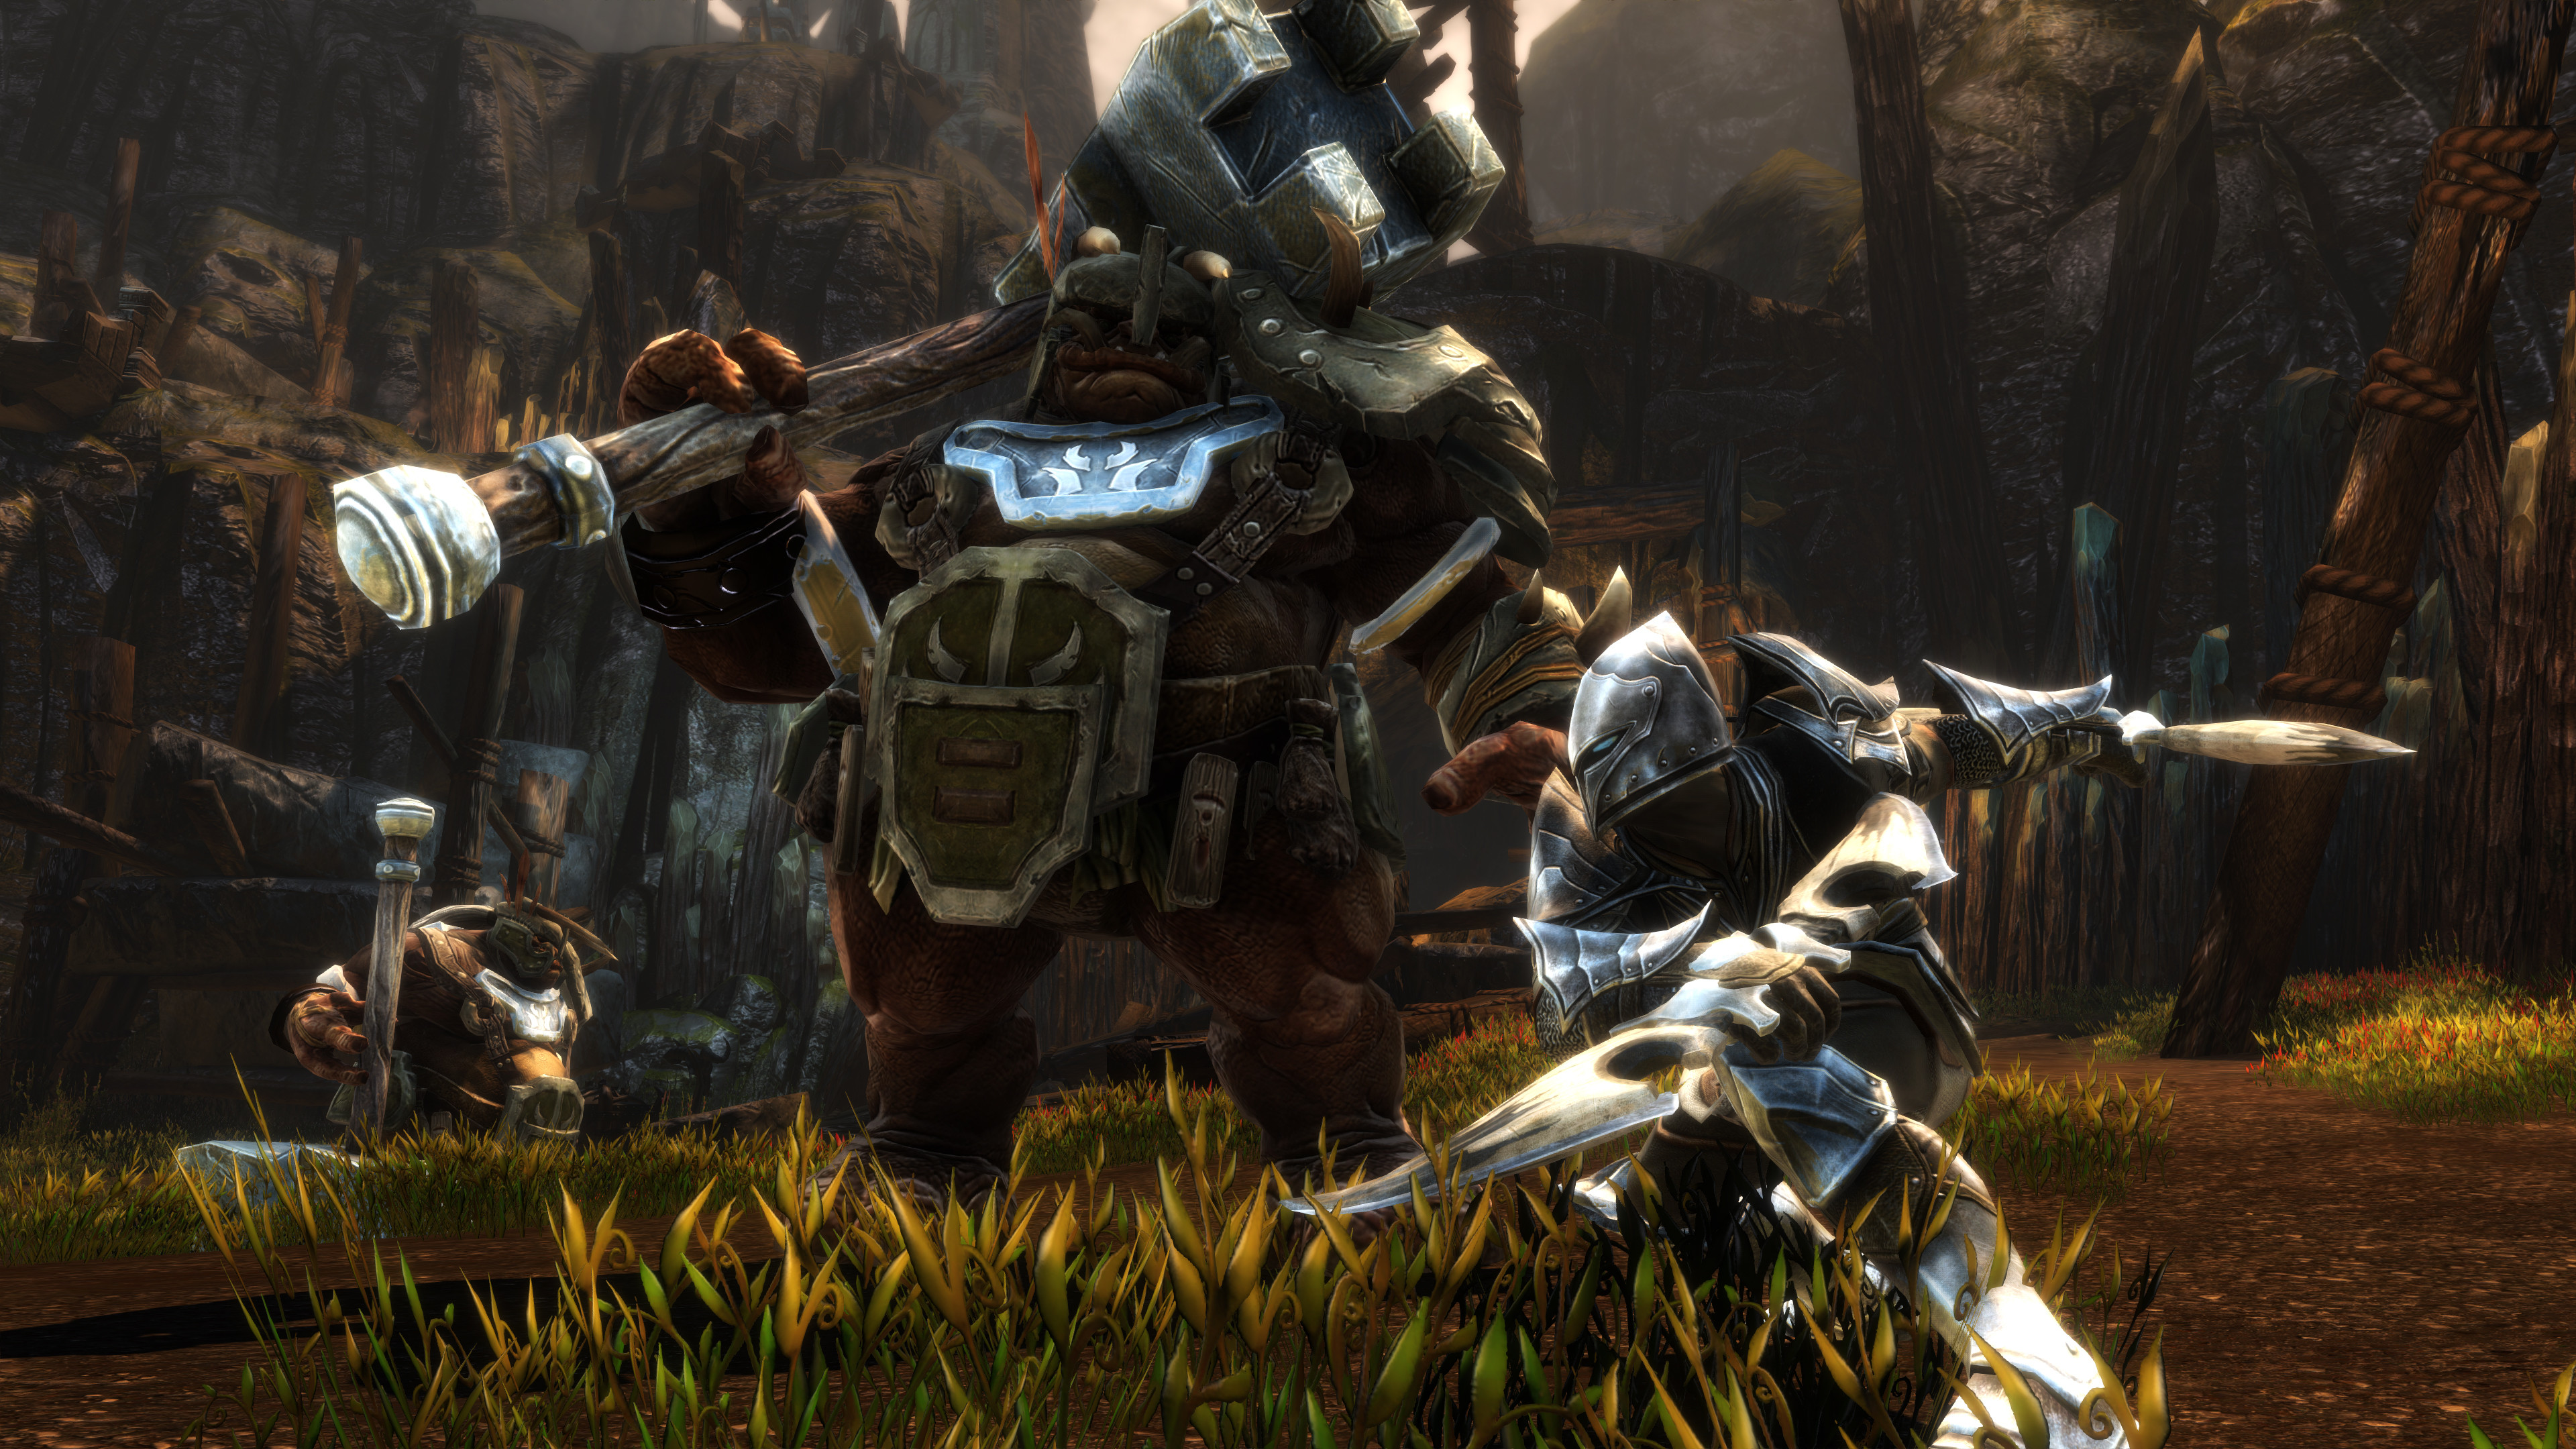  Kingdoms of Amalur: Re-Reckoning gets a release date, expansion announced 